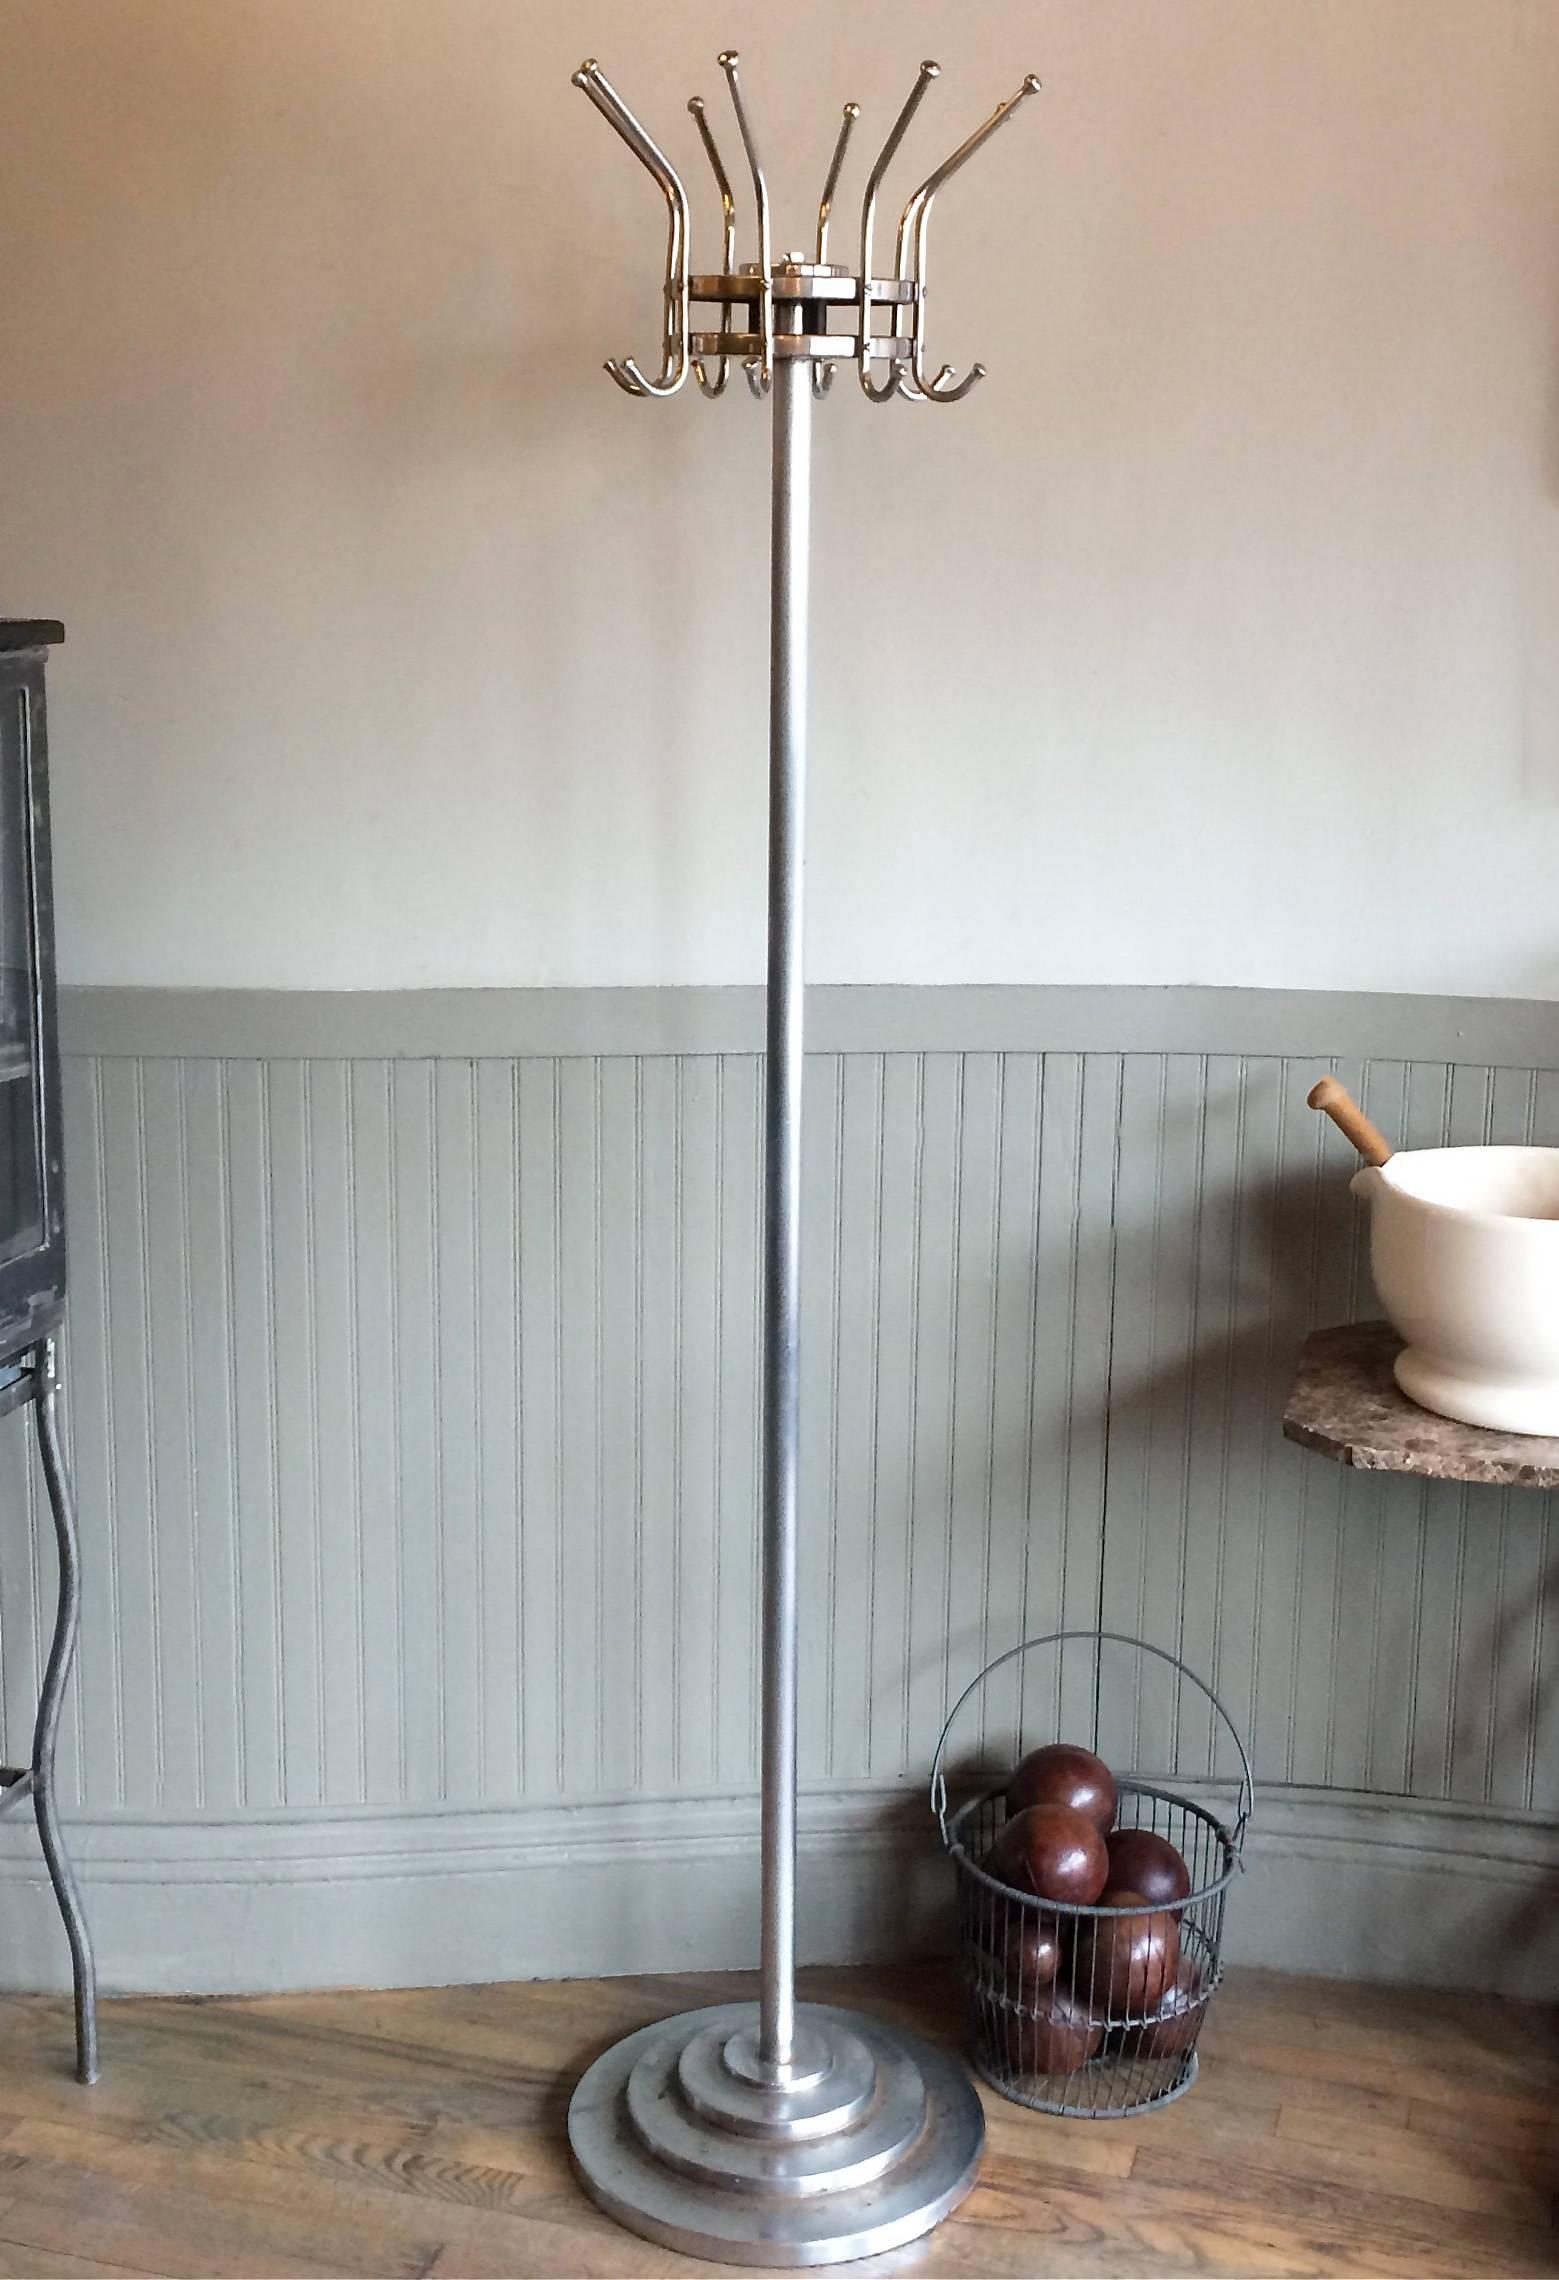 Vintage, American, Art Deco, machine age, freestanding hat or coat rack features a chrome-plated tubular steel post, weighted by a decorative cast iron stepped base with a revolving, detachable, oversized, double hook rack. Overall good condition